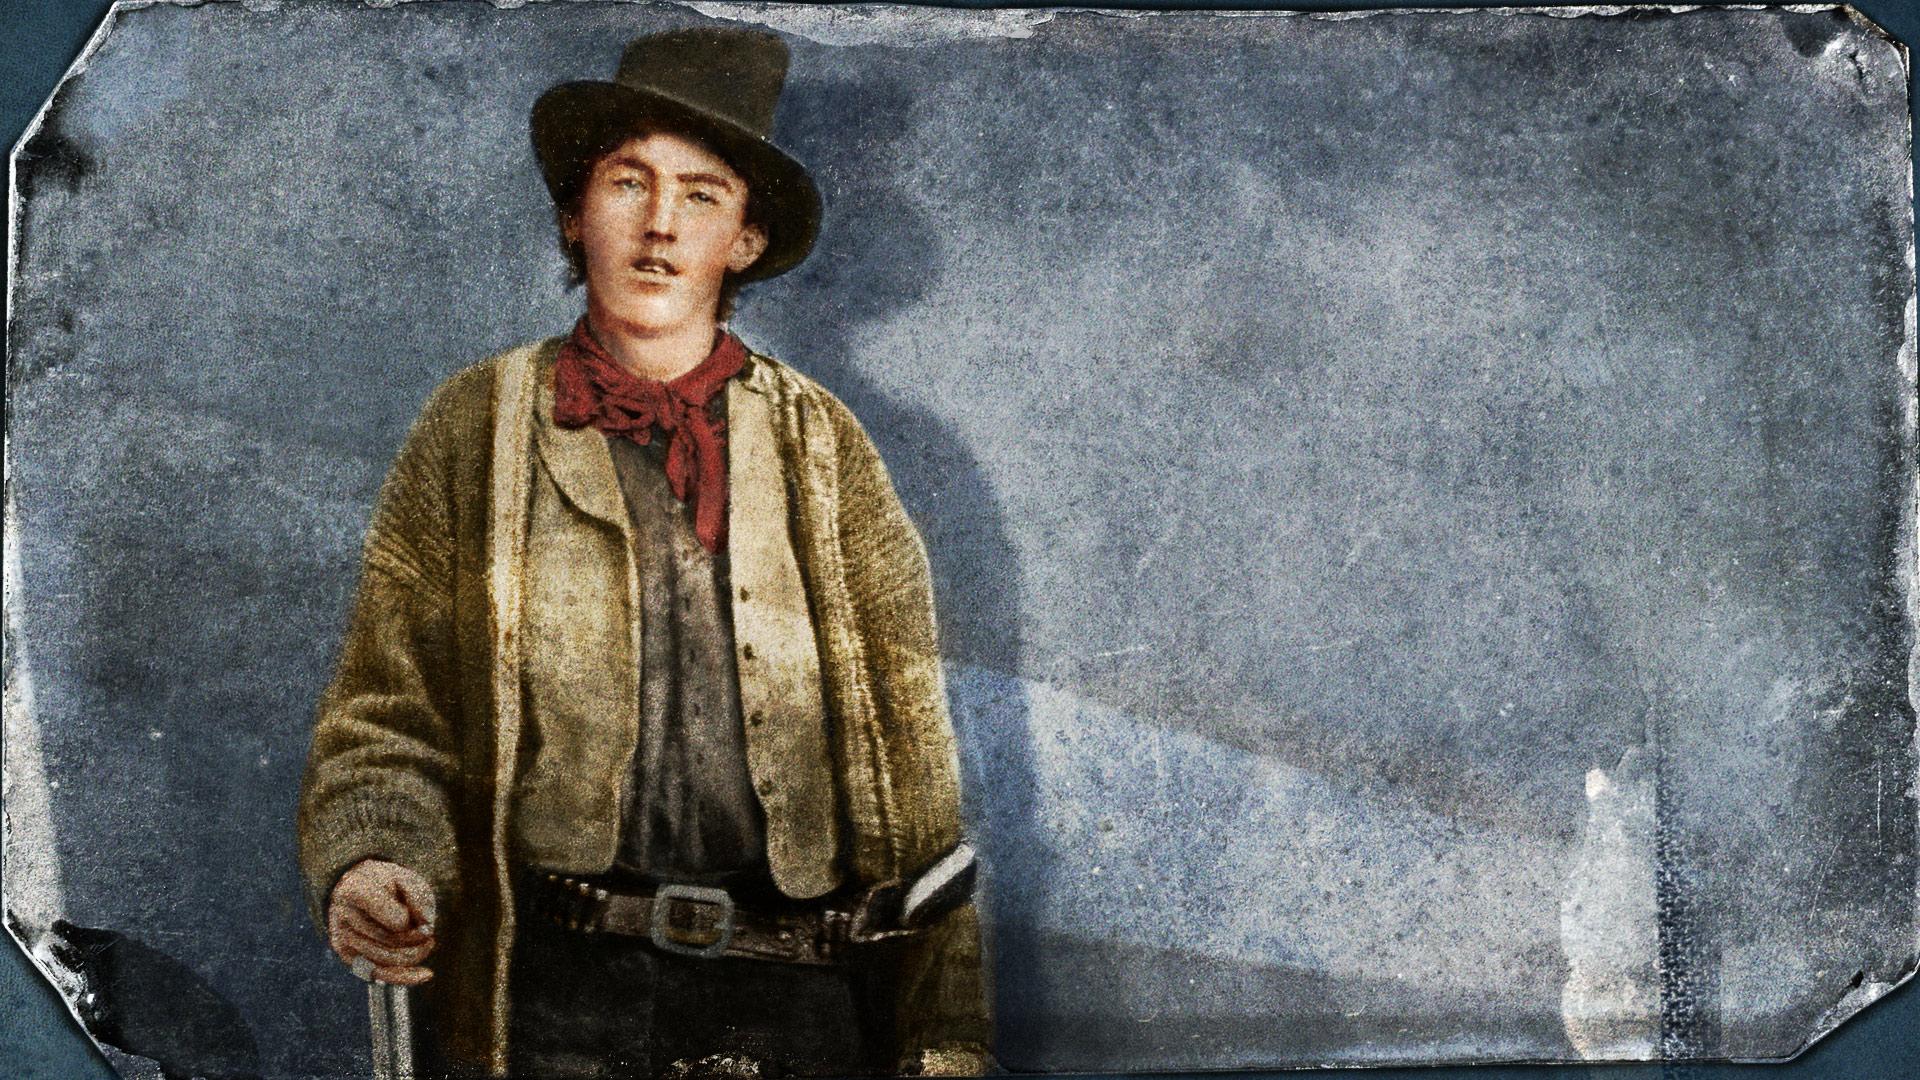 Billy The Kid Backgrounds, Compatible - PC, Mobile, Gadgets| 1920x1080 px